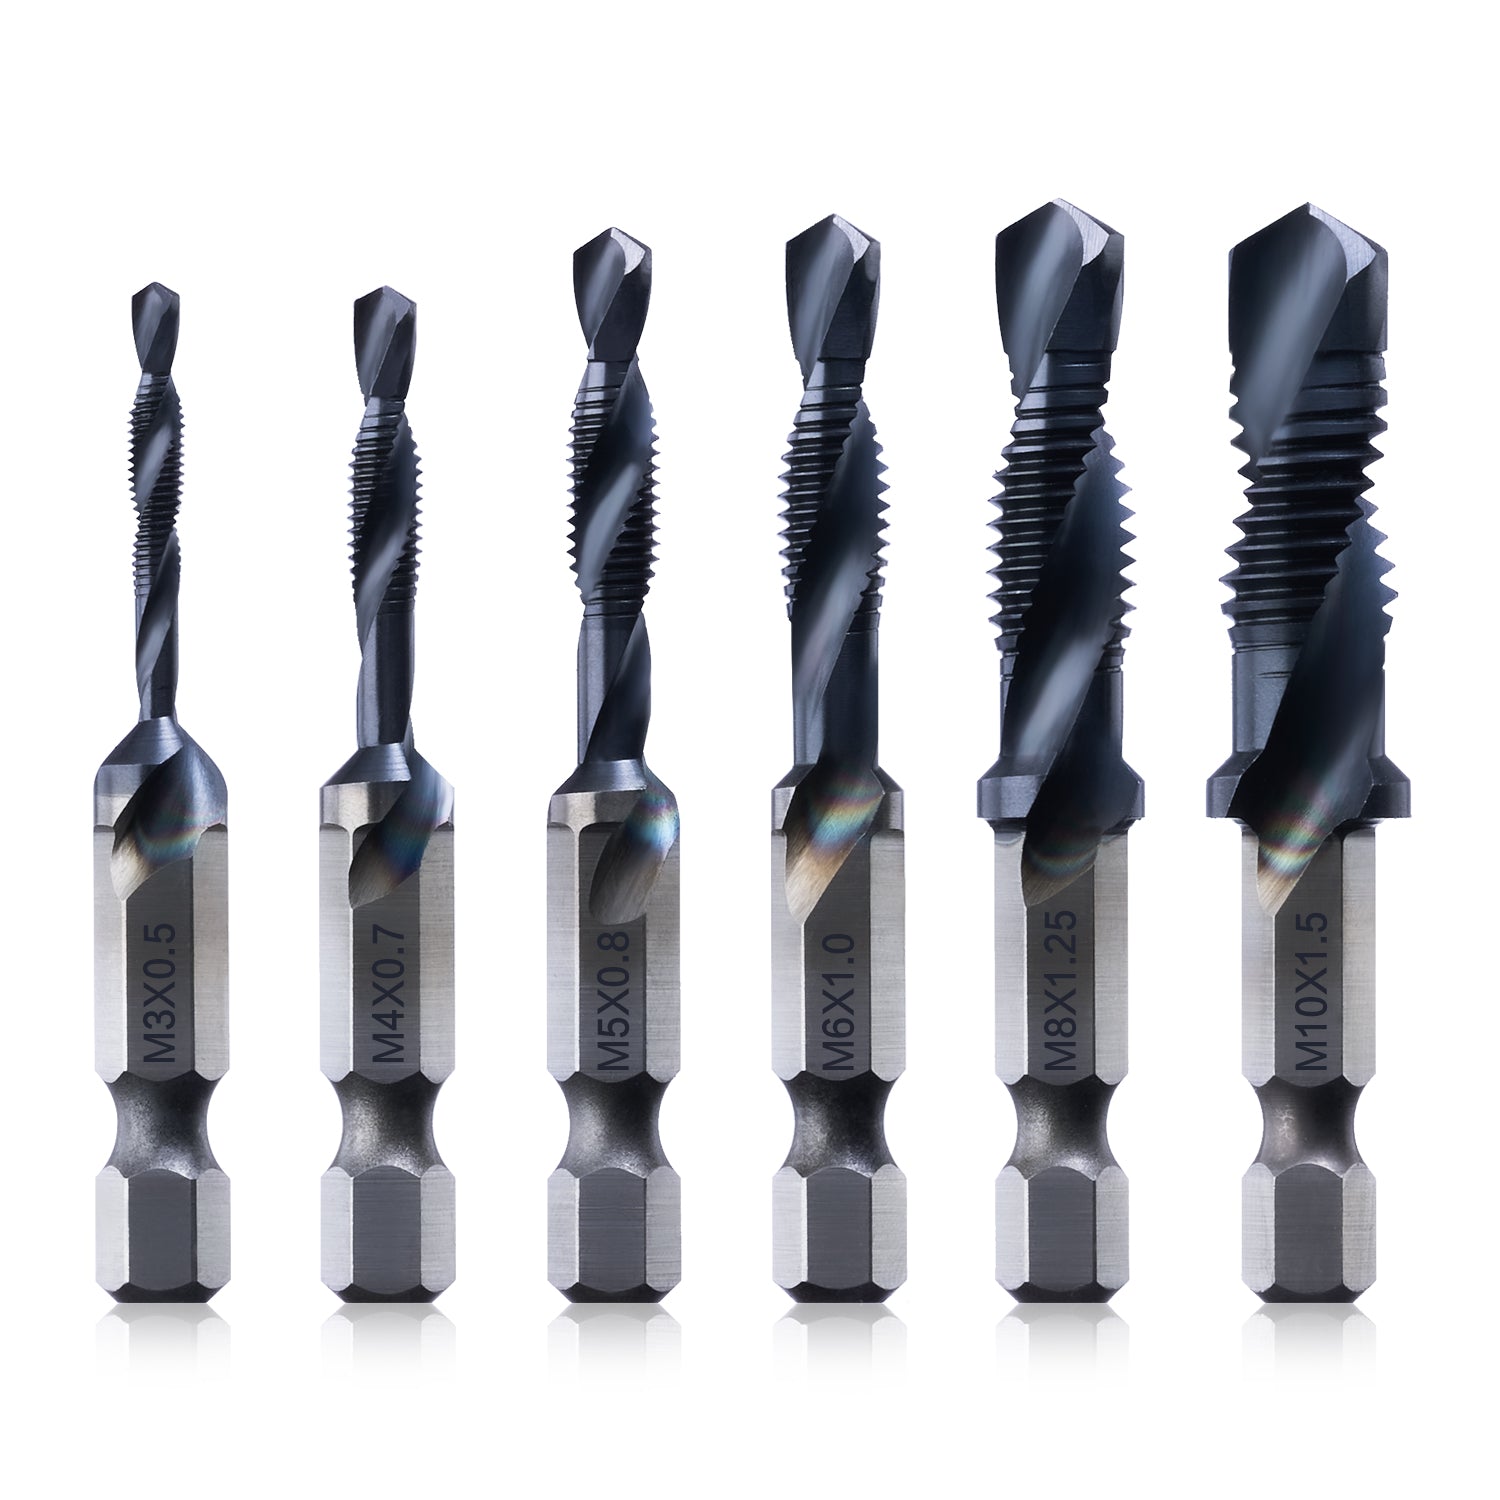 Combination Drill and Tap Bit Set, One-Step Drilling, Tapping, and Deburring/Countersinking for Stainless Steel, Aluminum,Copper, Plastic, Mild Steel